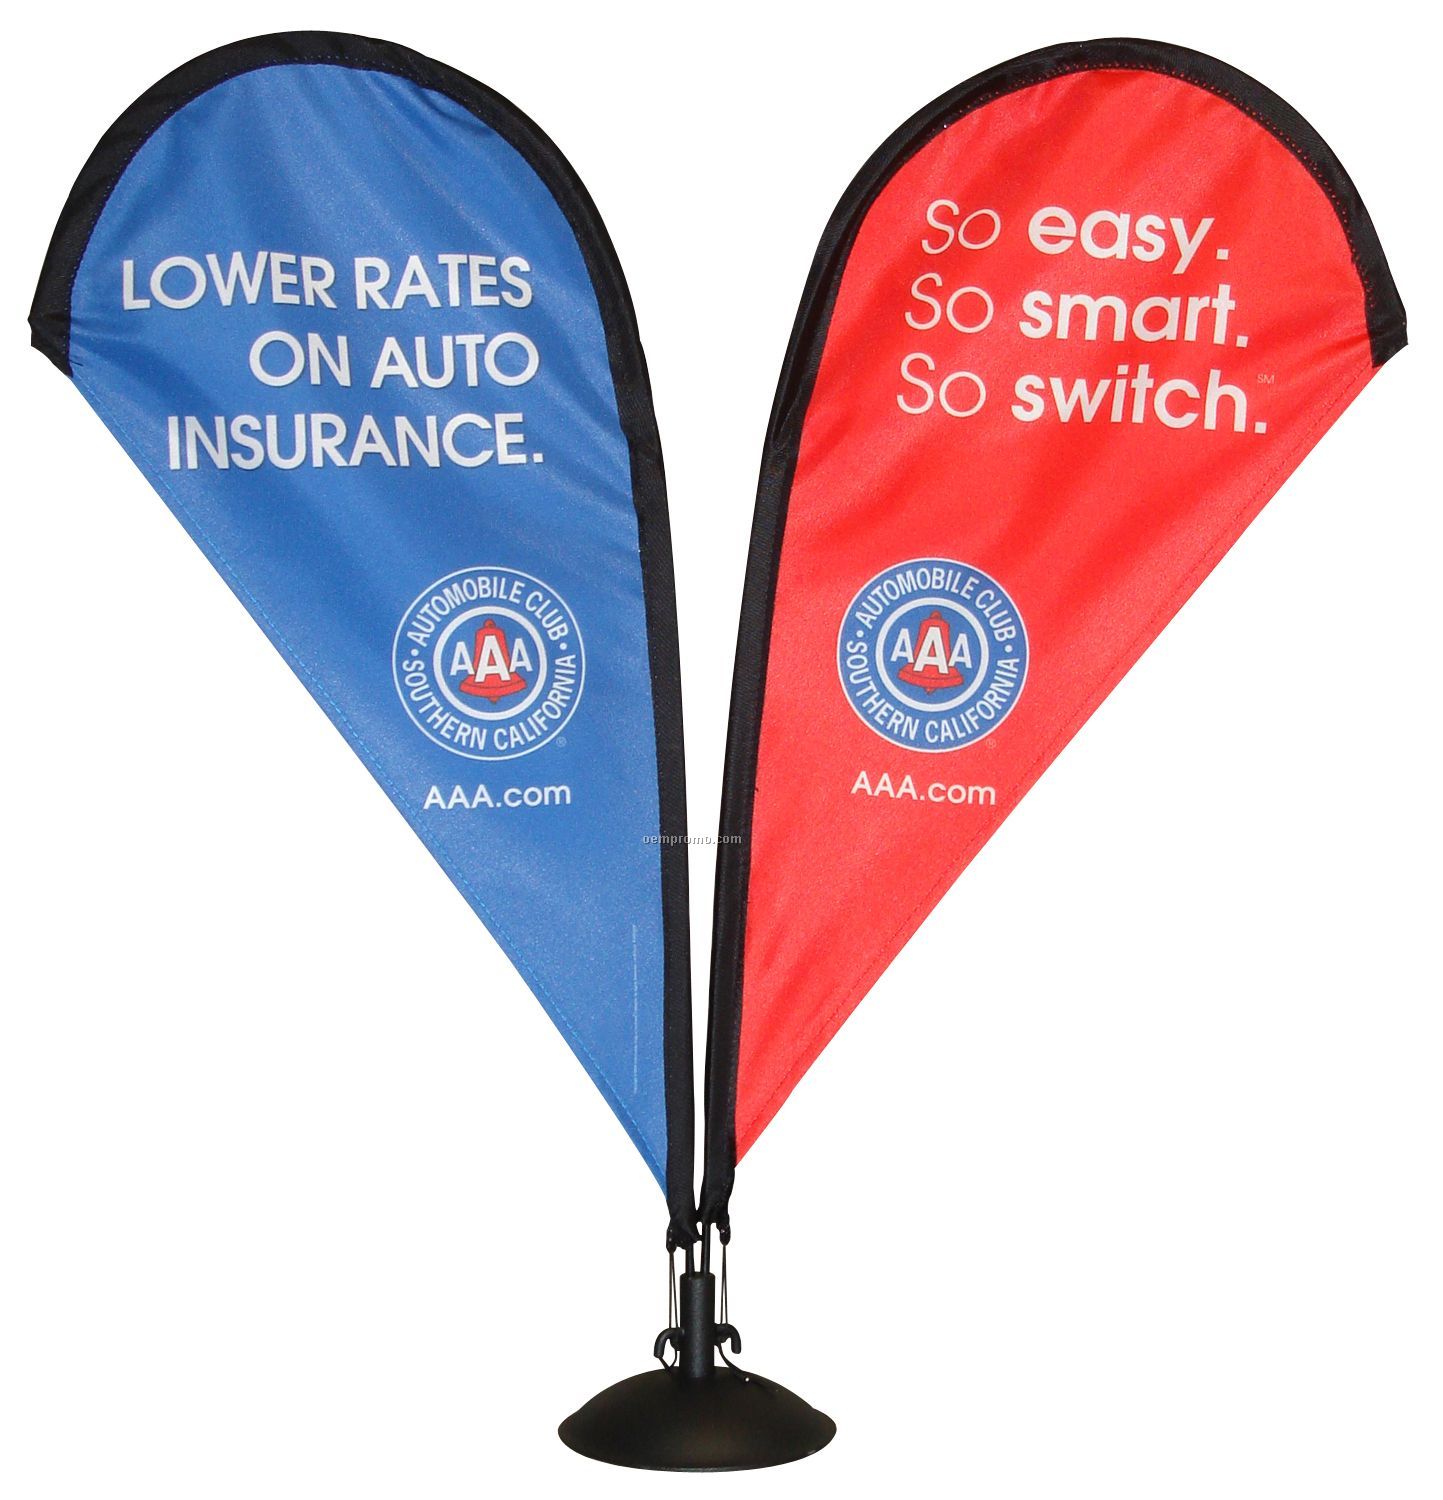 19" Table Top Single Sided Teardrop Banner & Stand